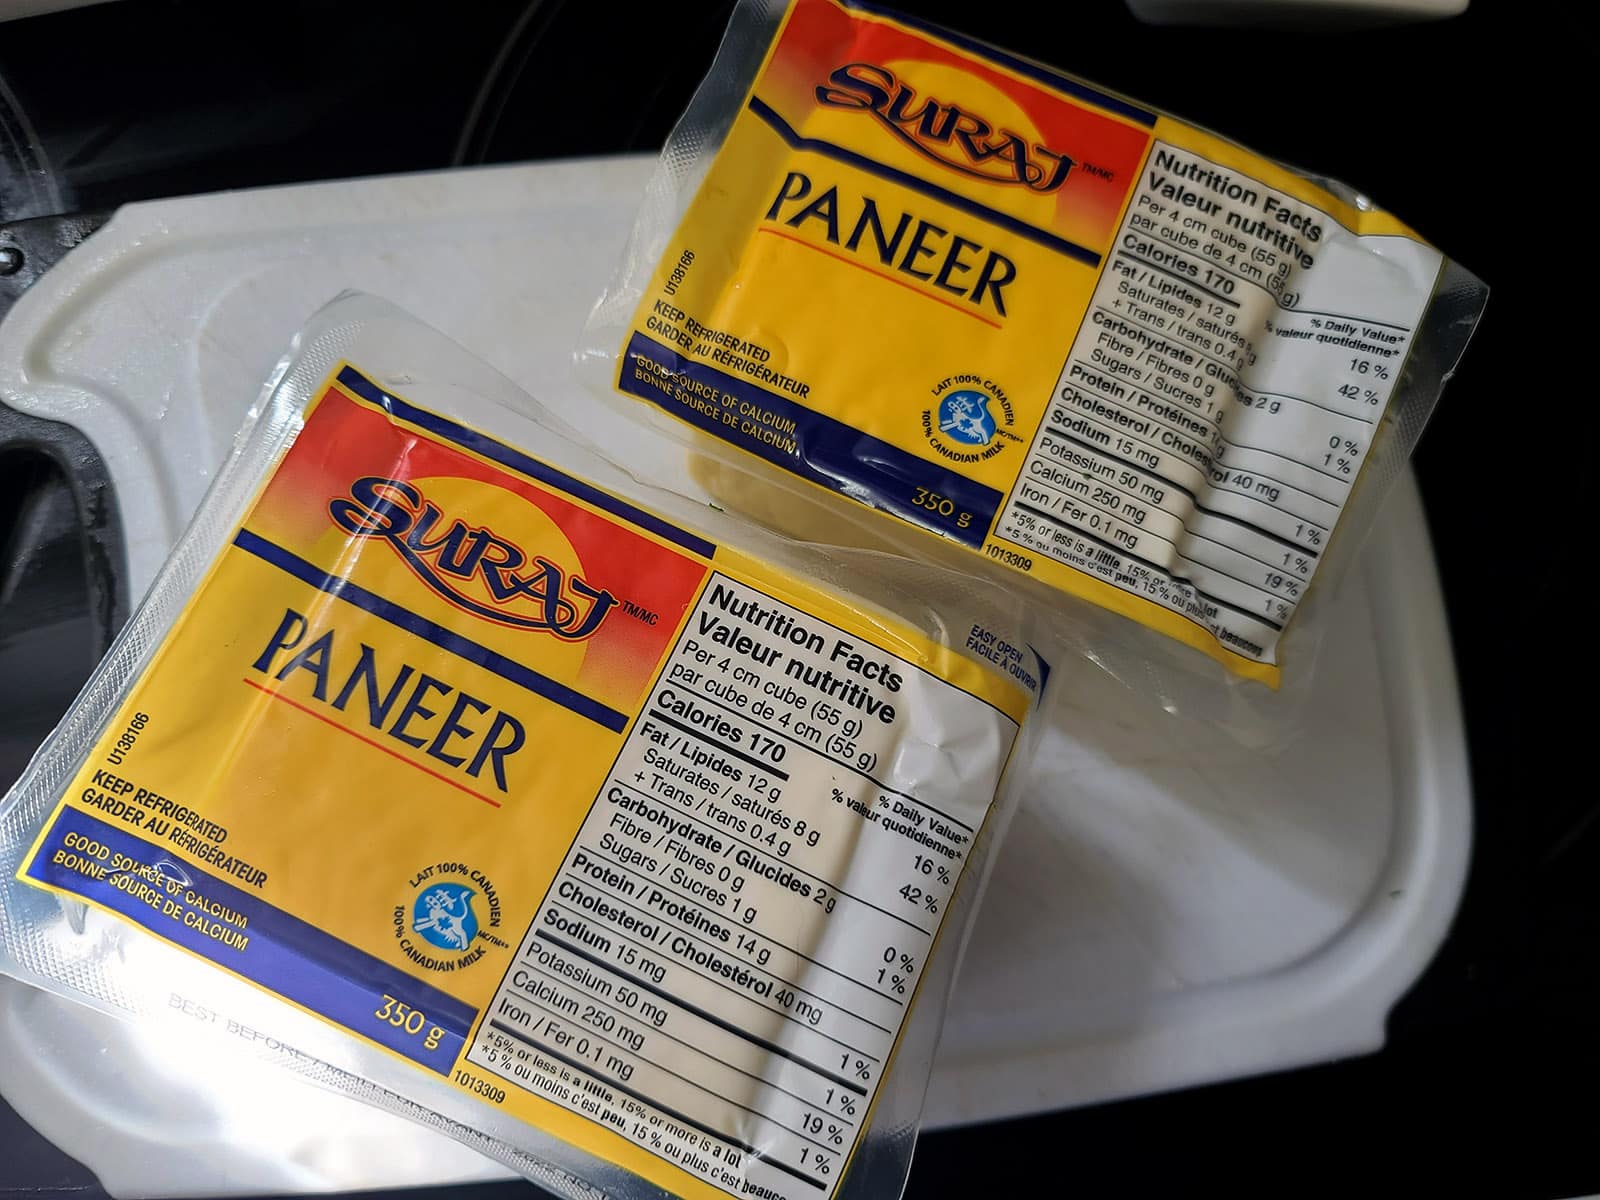 2 packages of paneer on a cutting board.